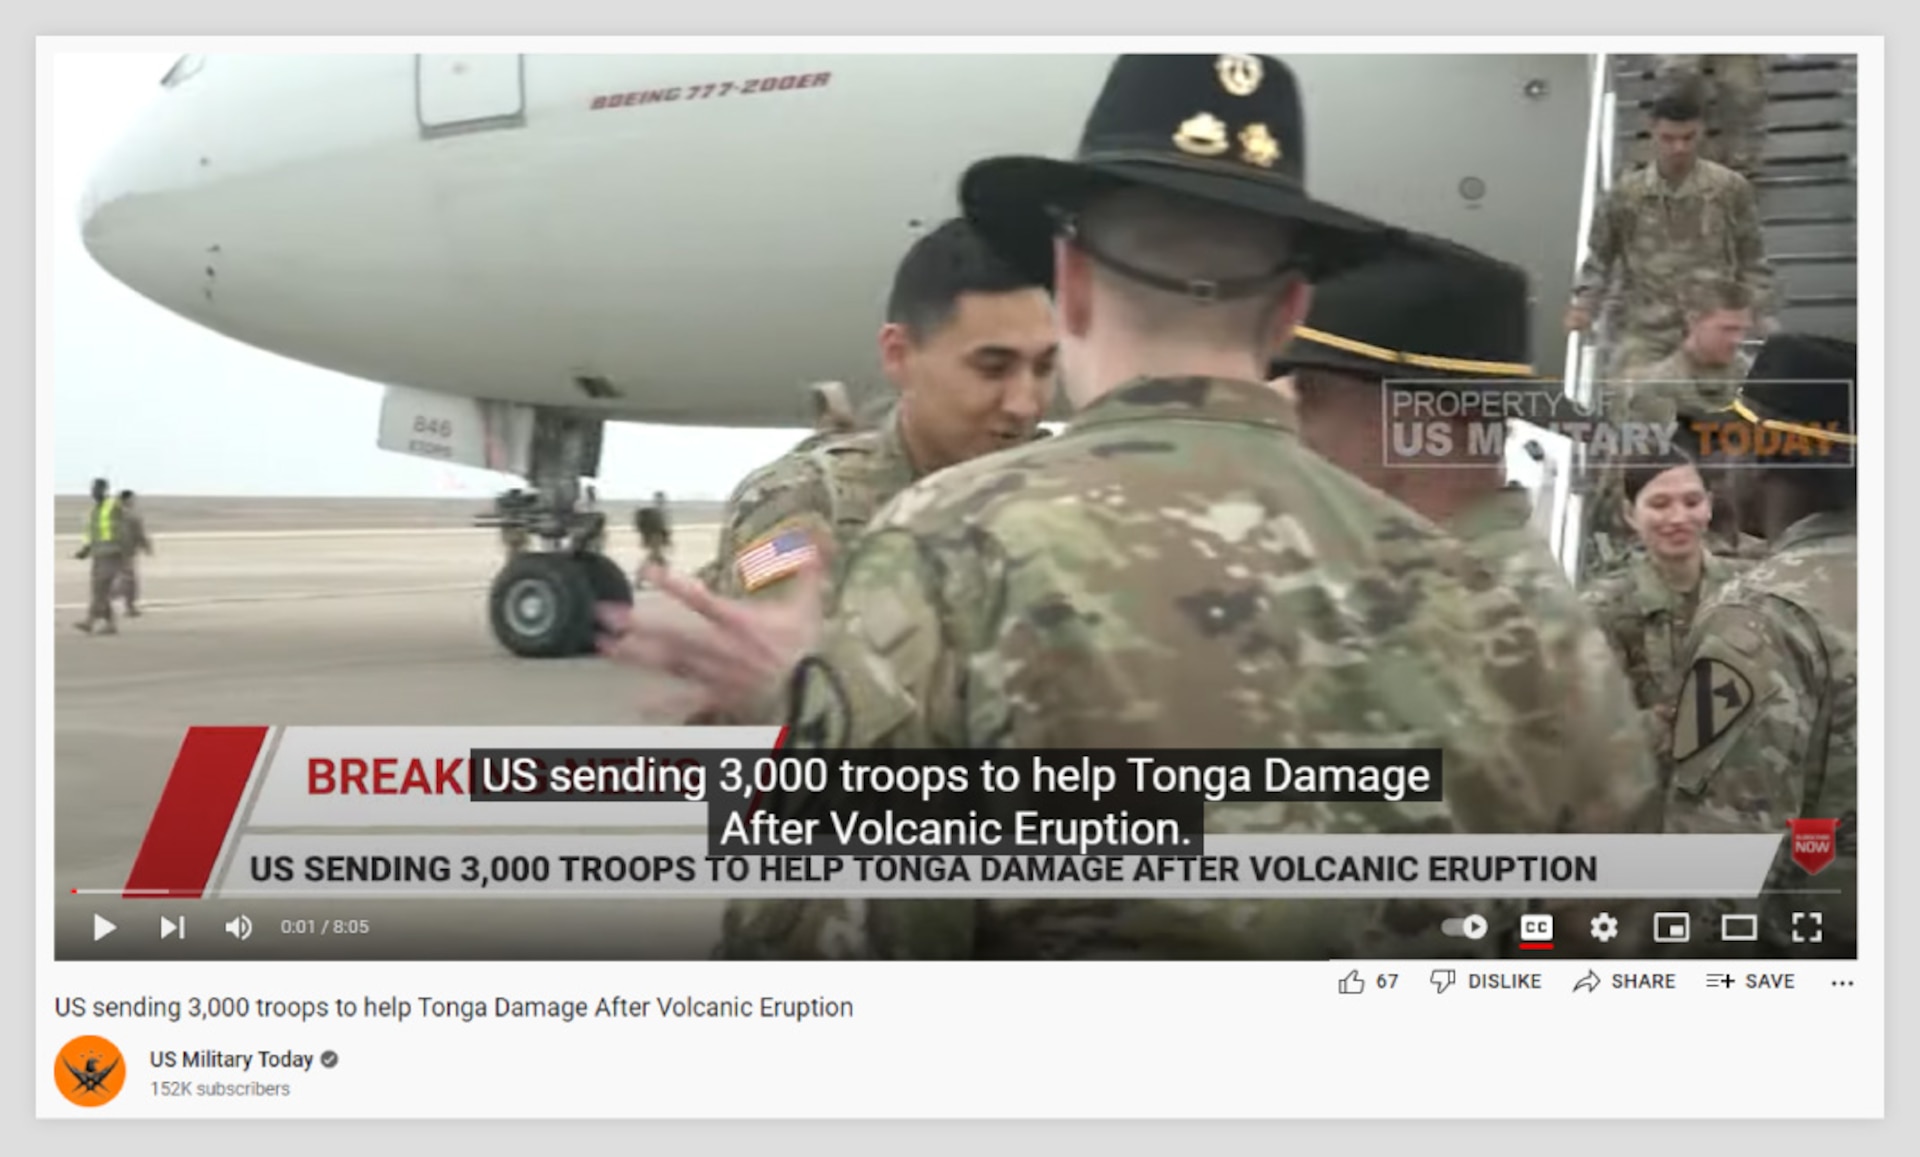 Screenshot of a paused 8-minute video displaying "Breaking News" and showing military personnel disembarking a Boeing 777-200ER aircraft. The video shows to have been uploaded by the US Military Today channel on January 18, 2022. The title of the video, the text on the video and the video's closed captioning all read, "US sending 3,000 troops to help Tonga Damage After Volcanic Eruption."